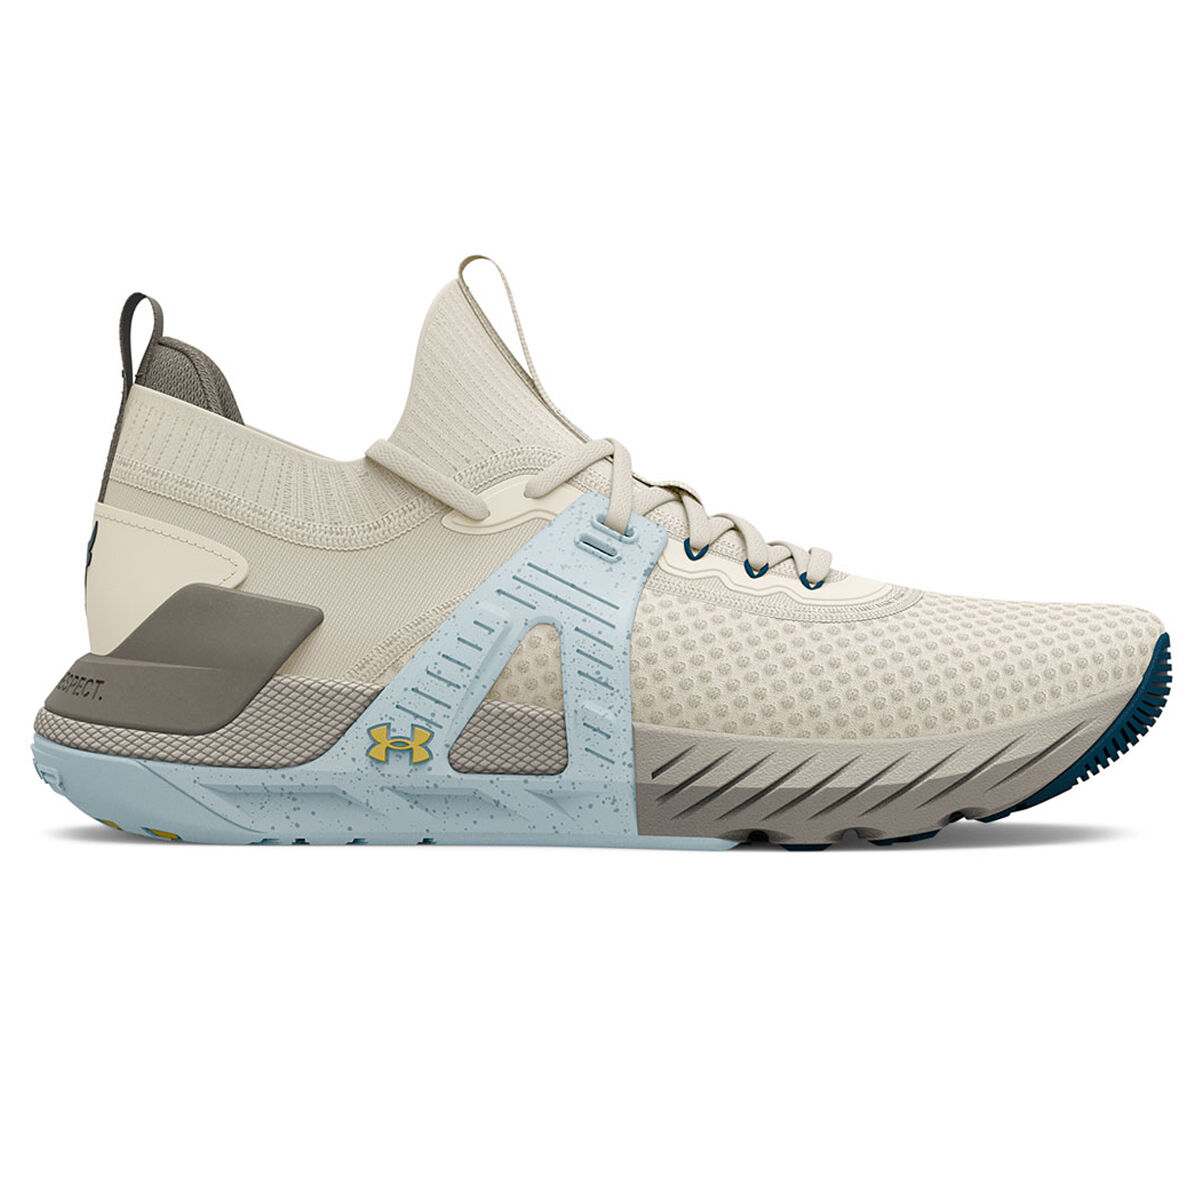 UNDER ARMOUR UA Project Rock 2 Training & Gym Shoes For Men - Buy UNDER  ARMOUR UA Project Rock 2 Training & Gym Shoes For Men Online at Best Price  - Shop